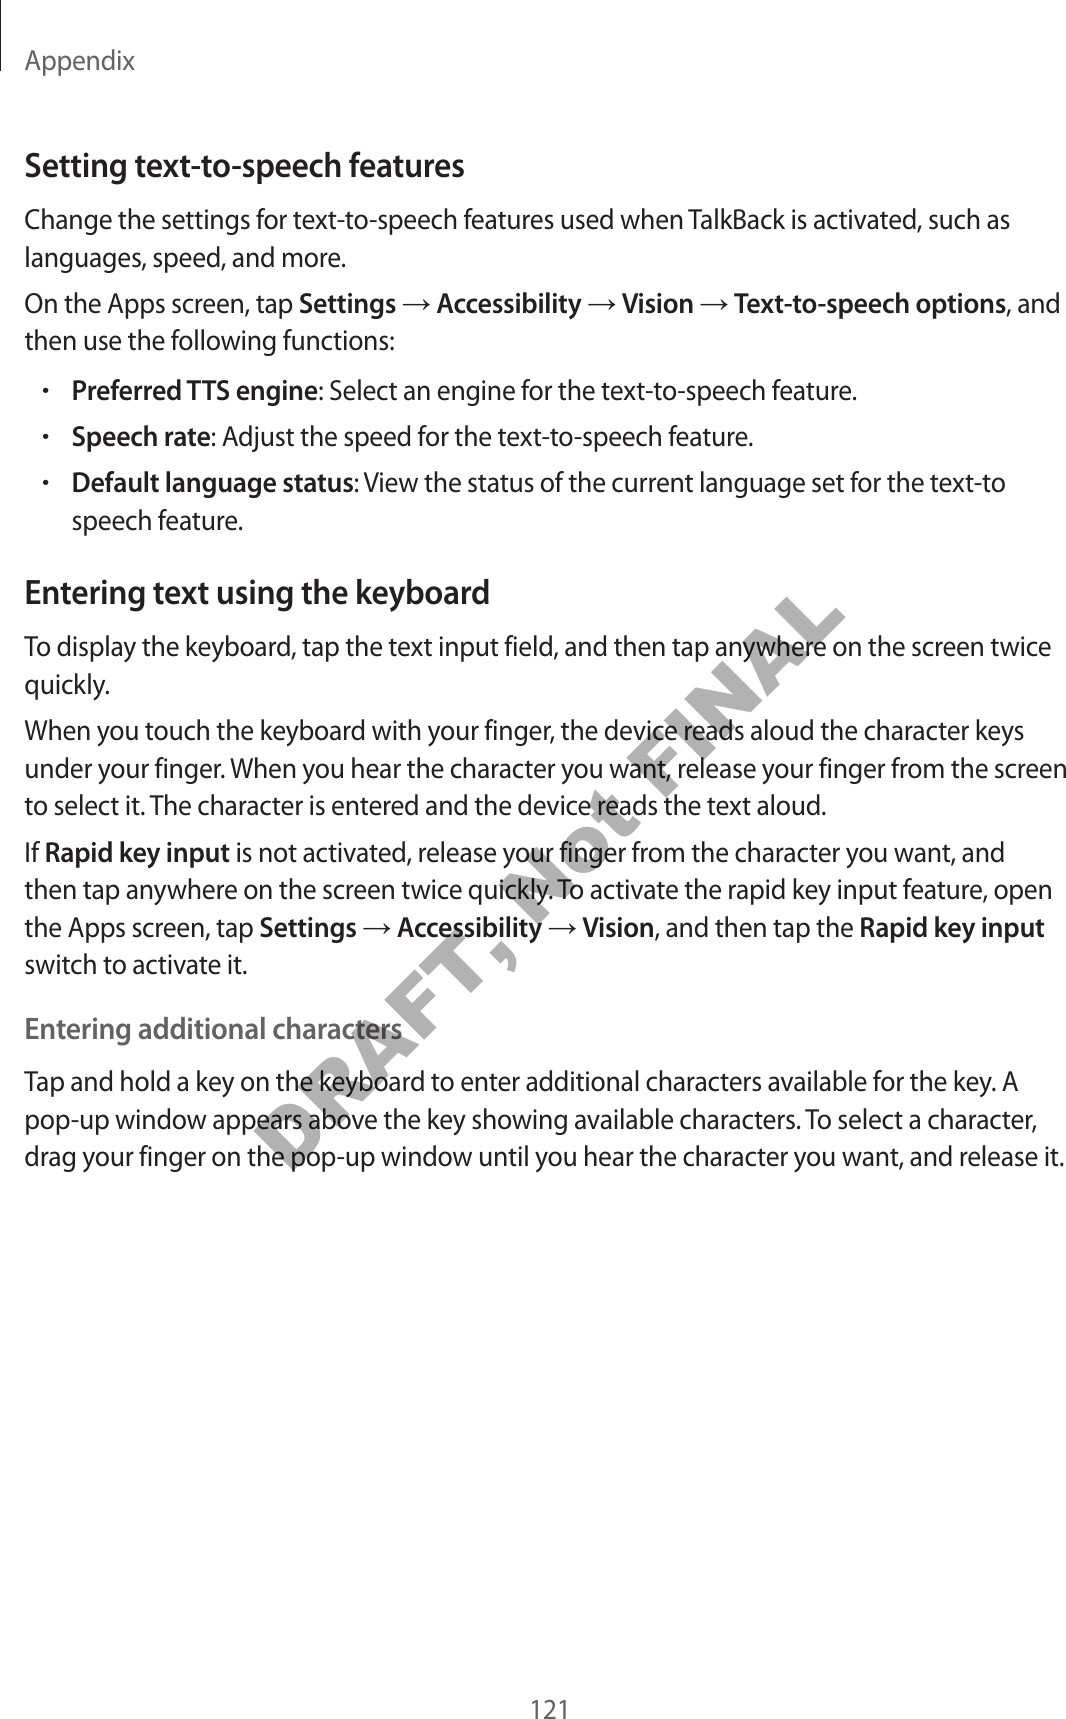 Appendix121Setting text-to-speech featur esChange the settings for t ext-to-speech featur es used when TalkBack is activated , such as languages, speed , and mor e .On the Apps screen, tap Settings  Accessibility  Vision  Text-to-speech options, and then use the follo wing functions:•Preferred TTS engine: Select an engine f or the t ext-to-speech featur e .•Speech rat e: Adjust the speed f or the t ext-to-speech featur e .•Default language status: View the status of the curr ent language set for the text-tospeech featur e.Entering t e xt using the keyboardTo display the keyboar d , tap the text input field, and then tap an ywhere on the scr een twice quickly.When you t ouch the keyboar d with y our finger, the device reads aloud the character keys under your finger. When you hear the character you wan t, r elease y our finger fr om the scr een to select it. The character is enter ed and the devic e r eads the te xt aloud.If Rapid key input is not activated, r elease y our finger fr om the character y ou want , and then tap anywhere on the scr een twice quickly. To activat e the rapid key input f ea tur e , open the Apps screen, tap Settings  Accessibility  Vision, and then tap the Rapid key input switch to activate it.Entering additional char actersTap and hold a key on the keyboard to ent er additional characters av ailable f or the key. A pop-up window appears above the key showing a v ailable characters. To select a character, drag your finger on the pop-up window until y ou hear the character y ou want , and r elease it.DRAFT, Not FINAL